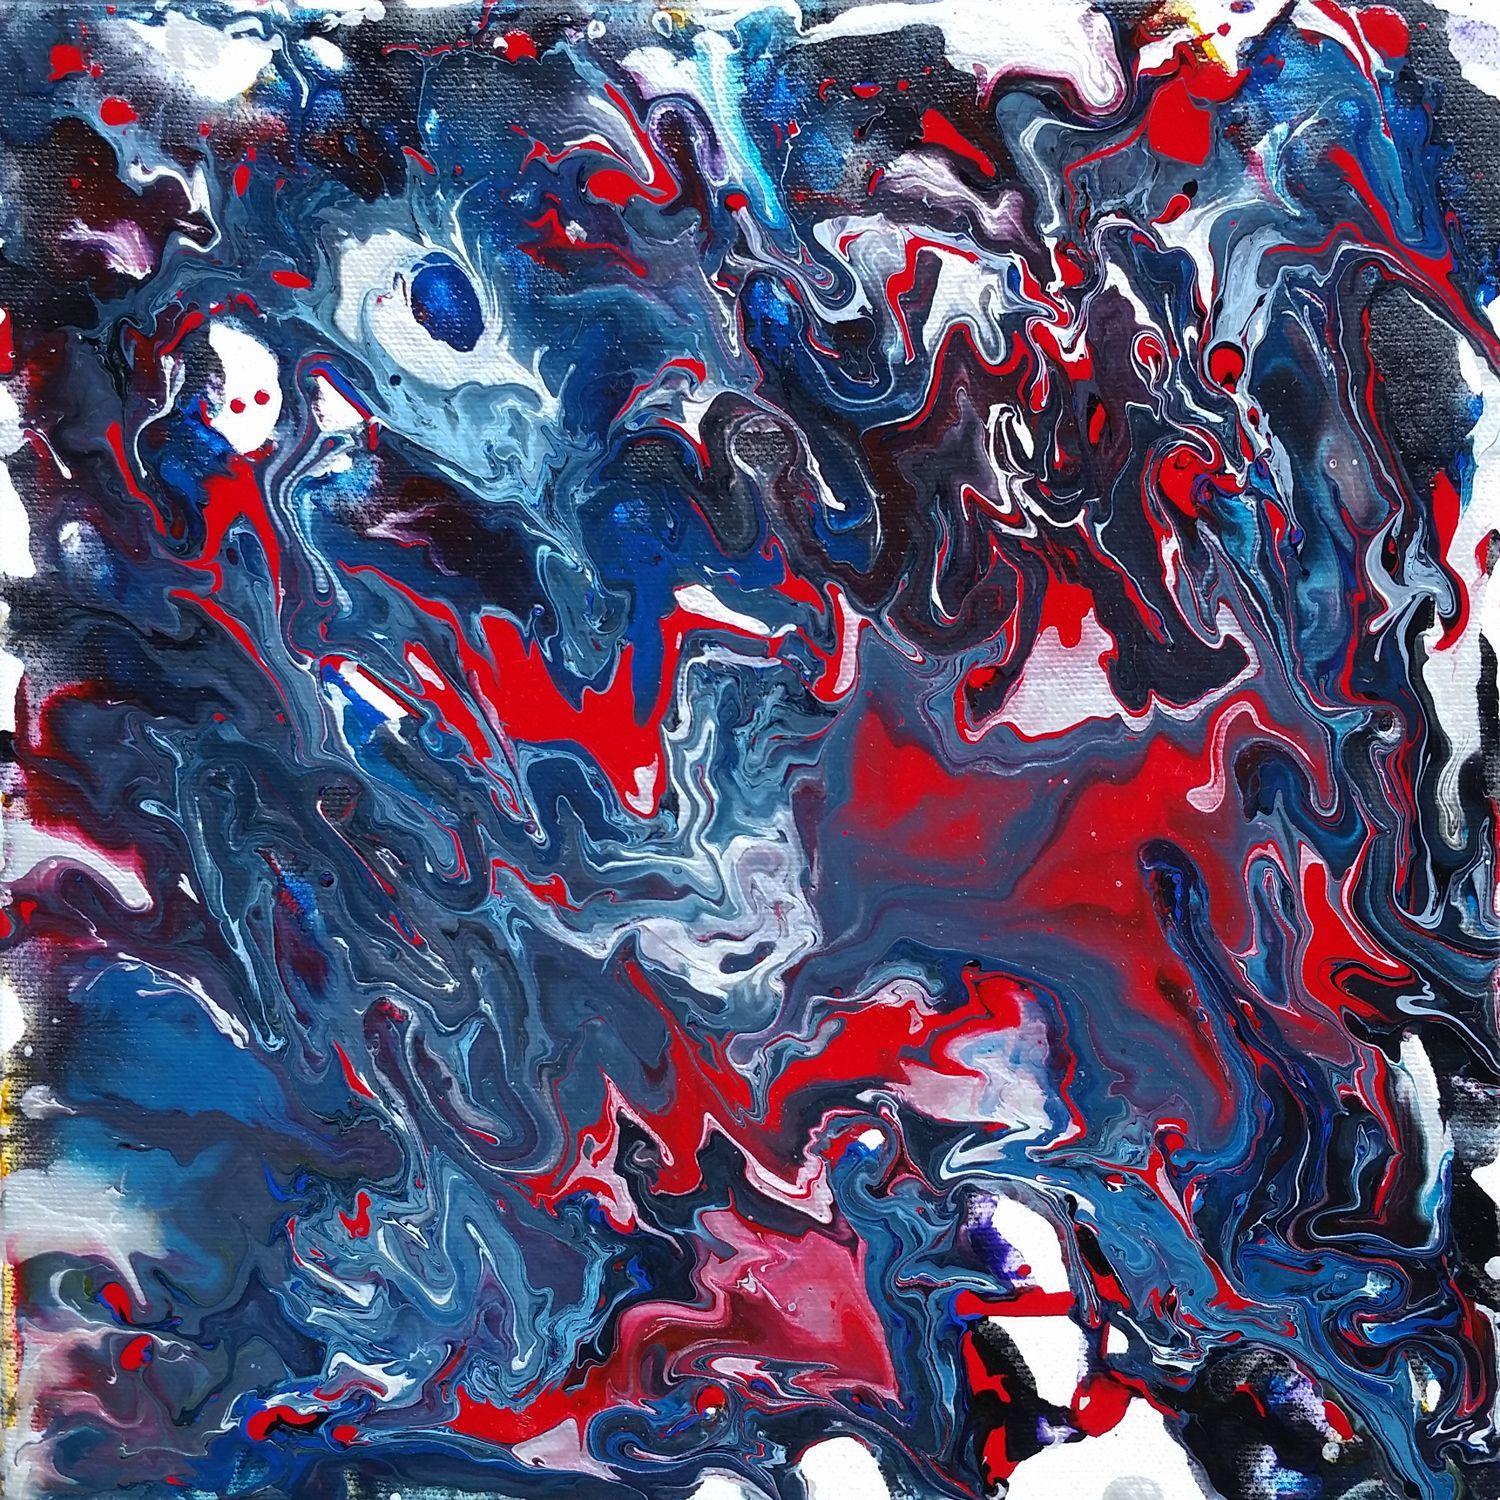 Nebula Flow is a fluid painting of outer space. The "Orion Nebula" is a nebula in the milky way which contains red and blue-violet colors. This is one of the paintings completed at the live art event at Yonge-Dundas Square in Toronto for Youth Day